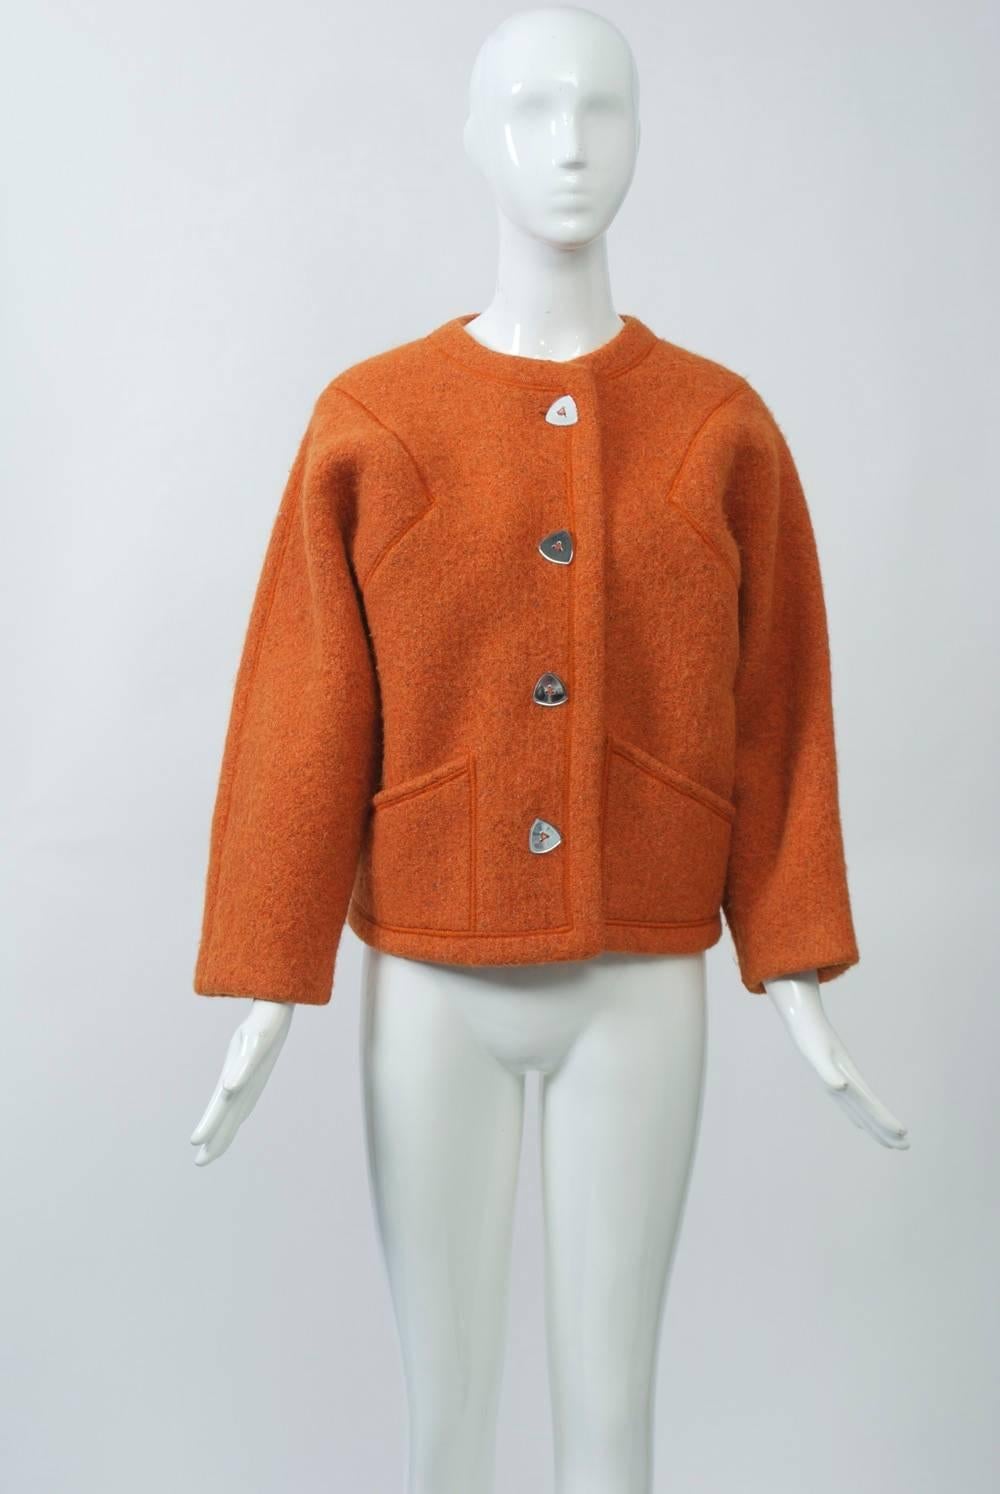 Short jacket in pumpkin boiled wool by Missoni featuring dolman sleeves, welted-seam detailing throughout, and triangular mirrored buttons. Unlined. A great piece. Size S.